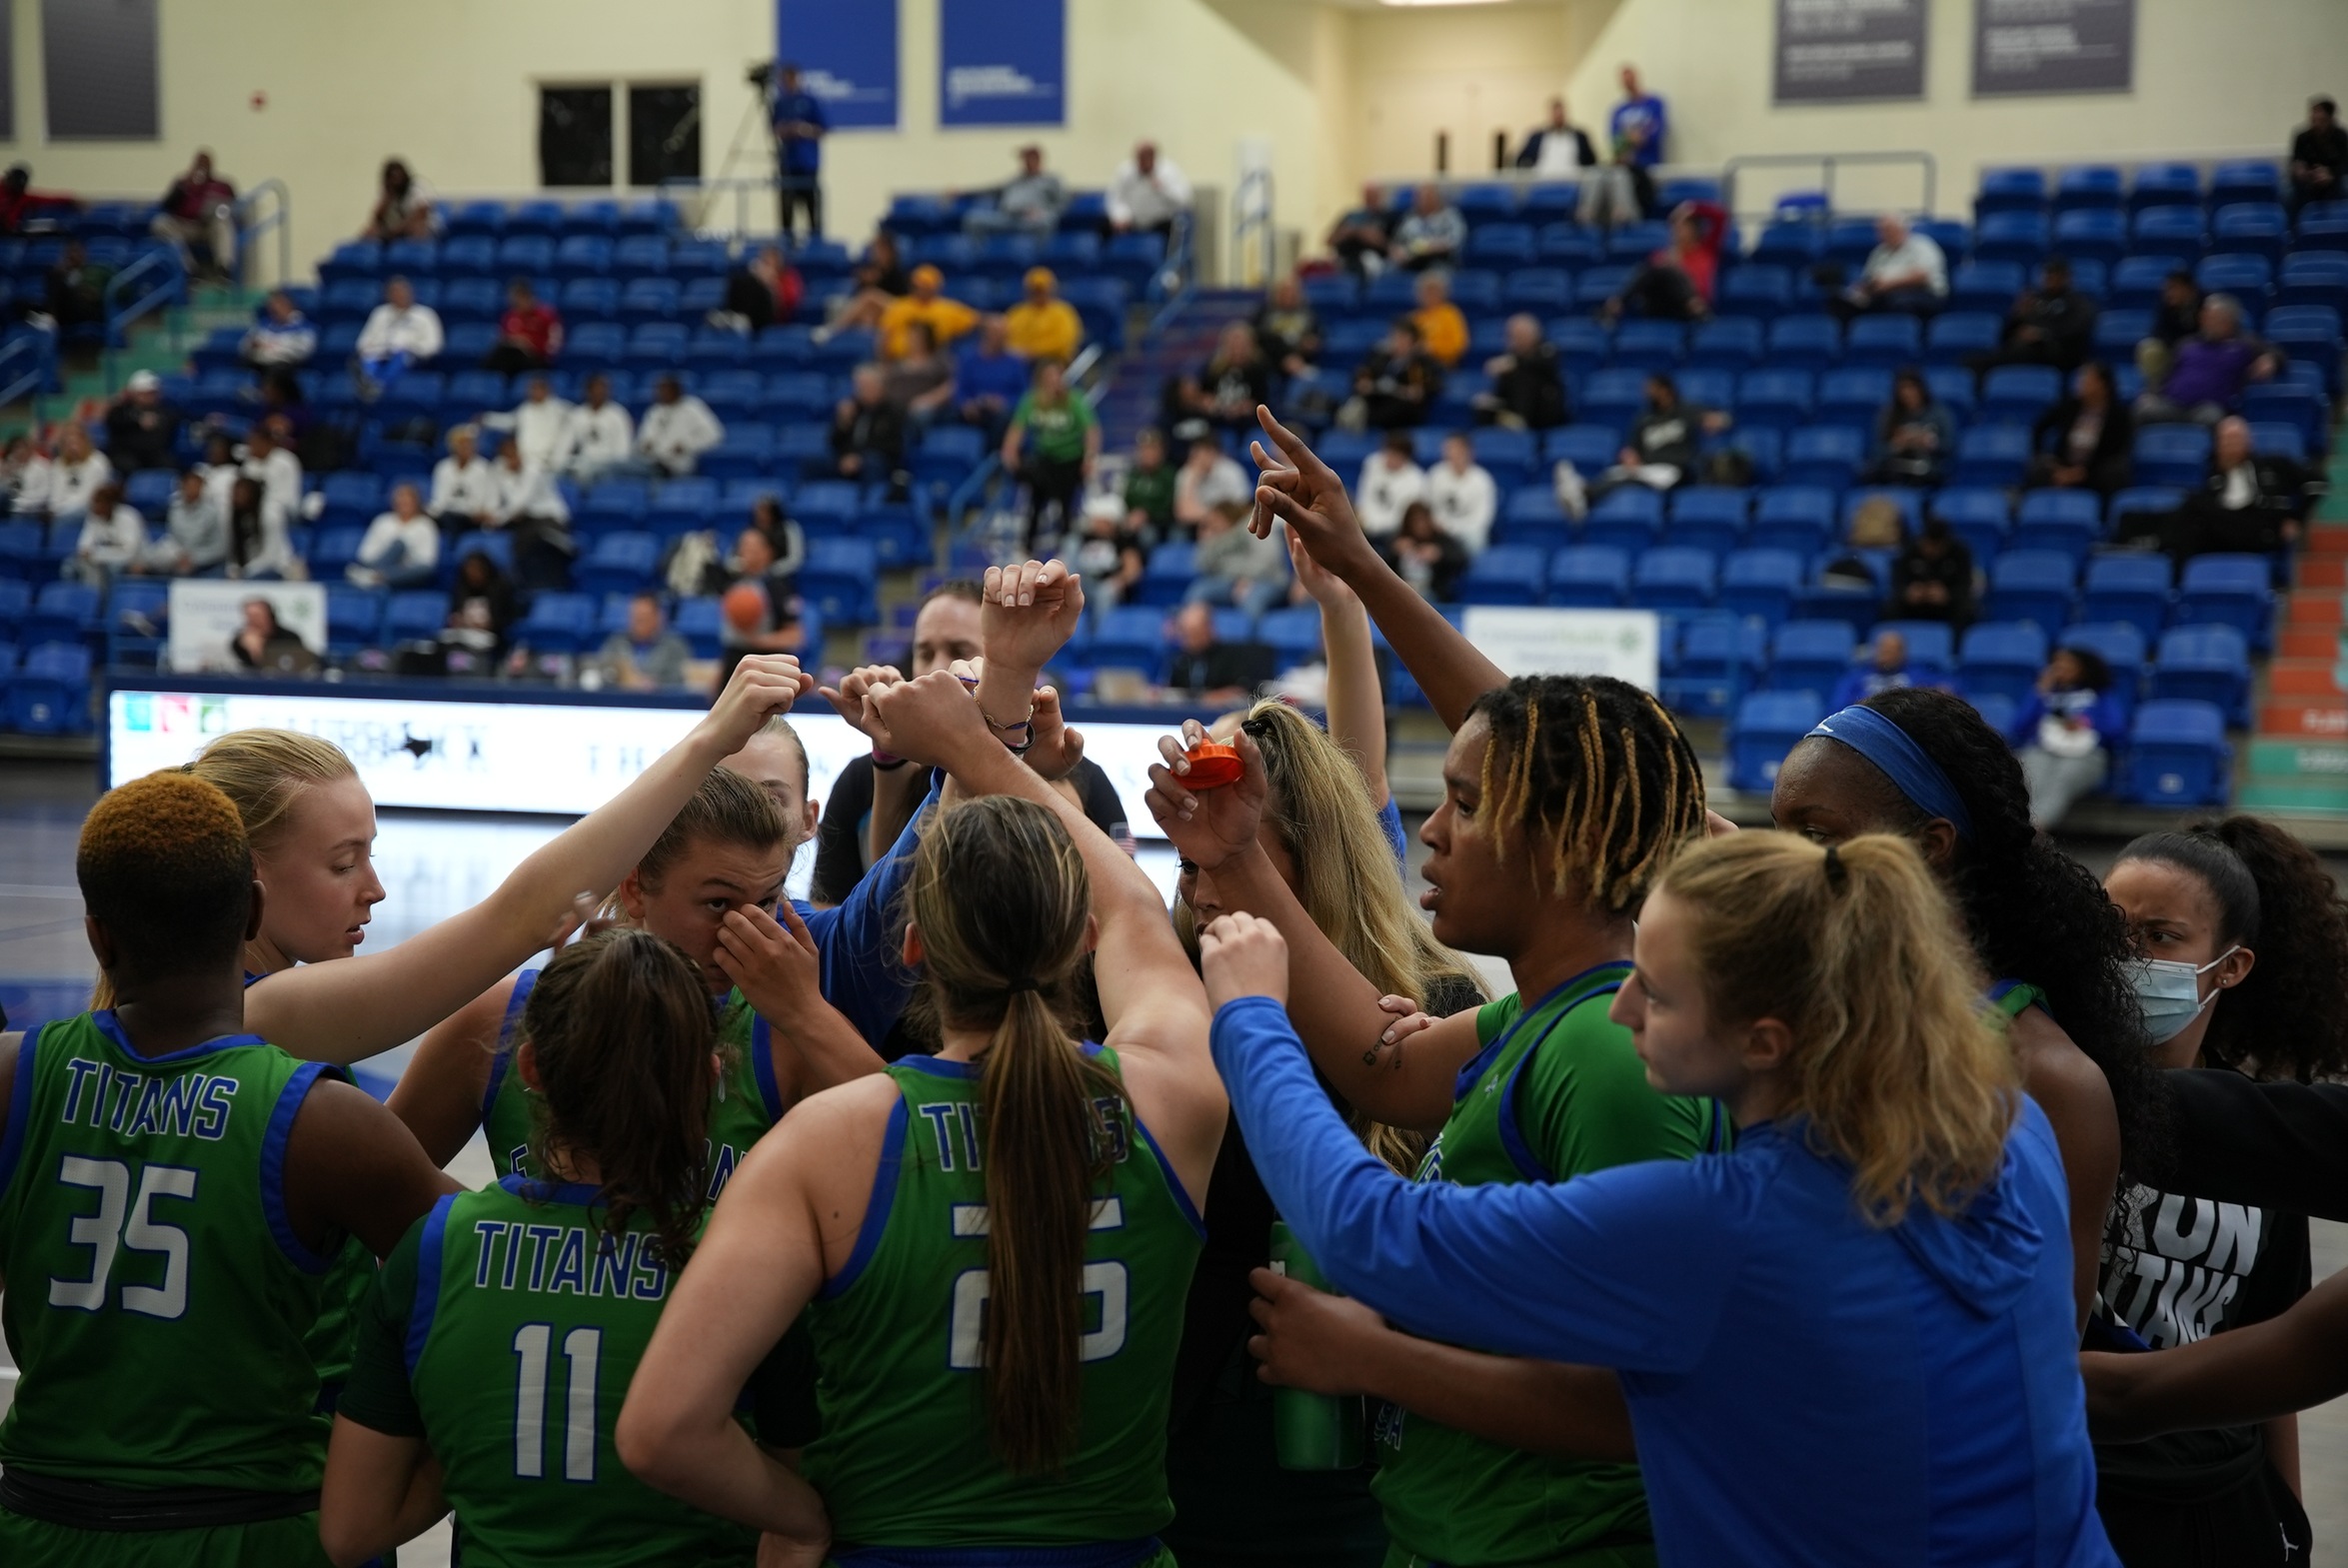 GAME DAY! Women's basketball team plays in national tournament quarterfinals at 4 p.m. EDT